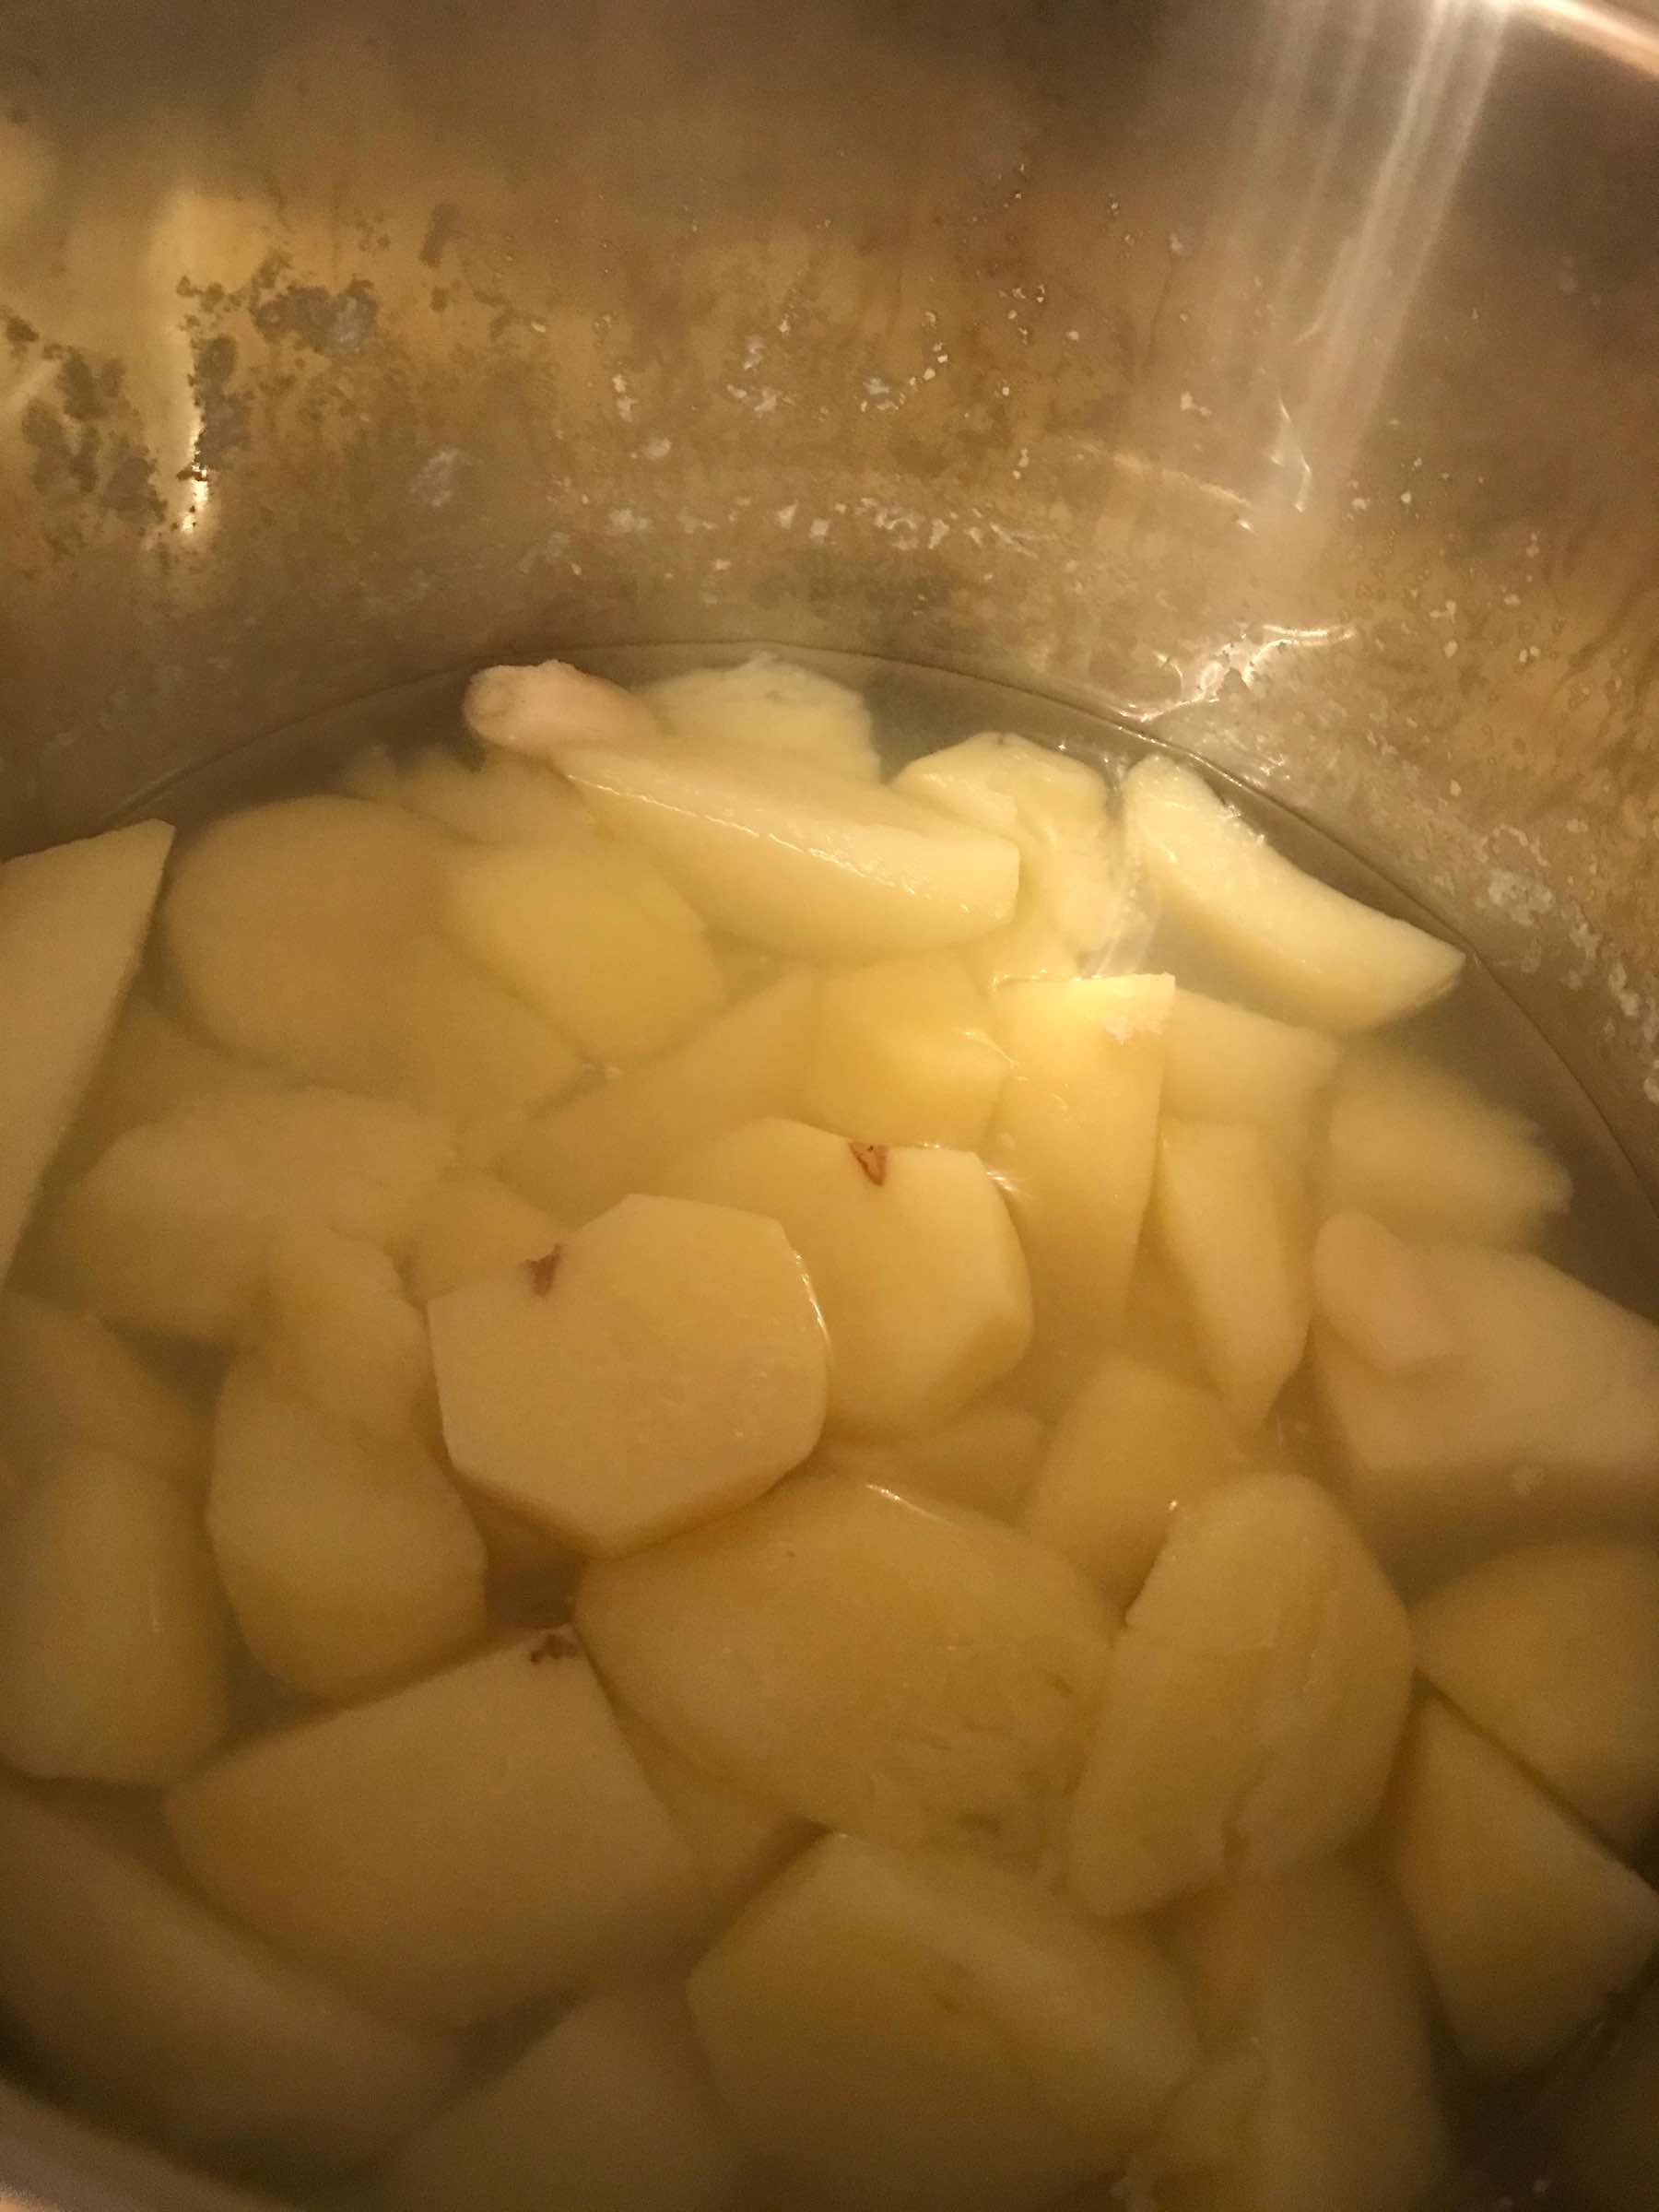 Quartered potatoes before cooking